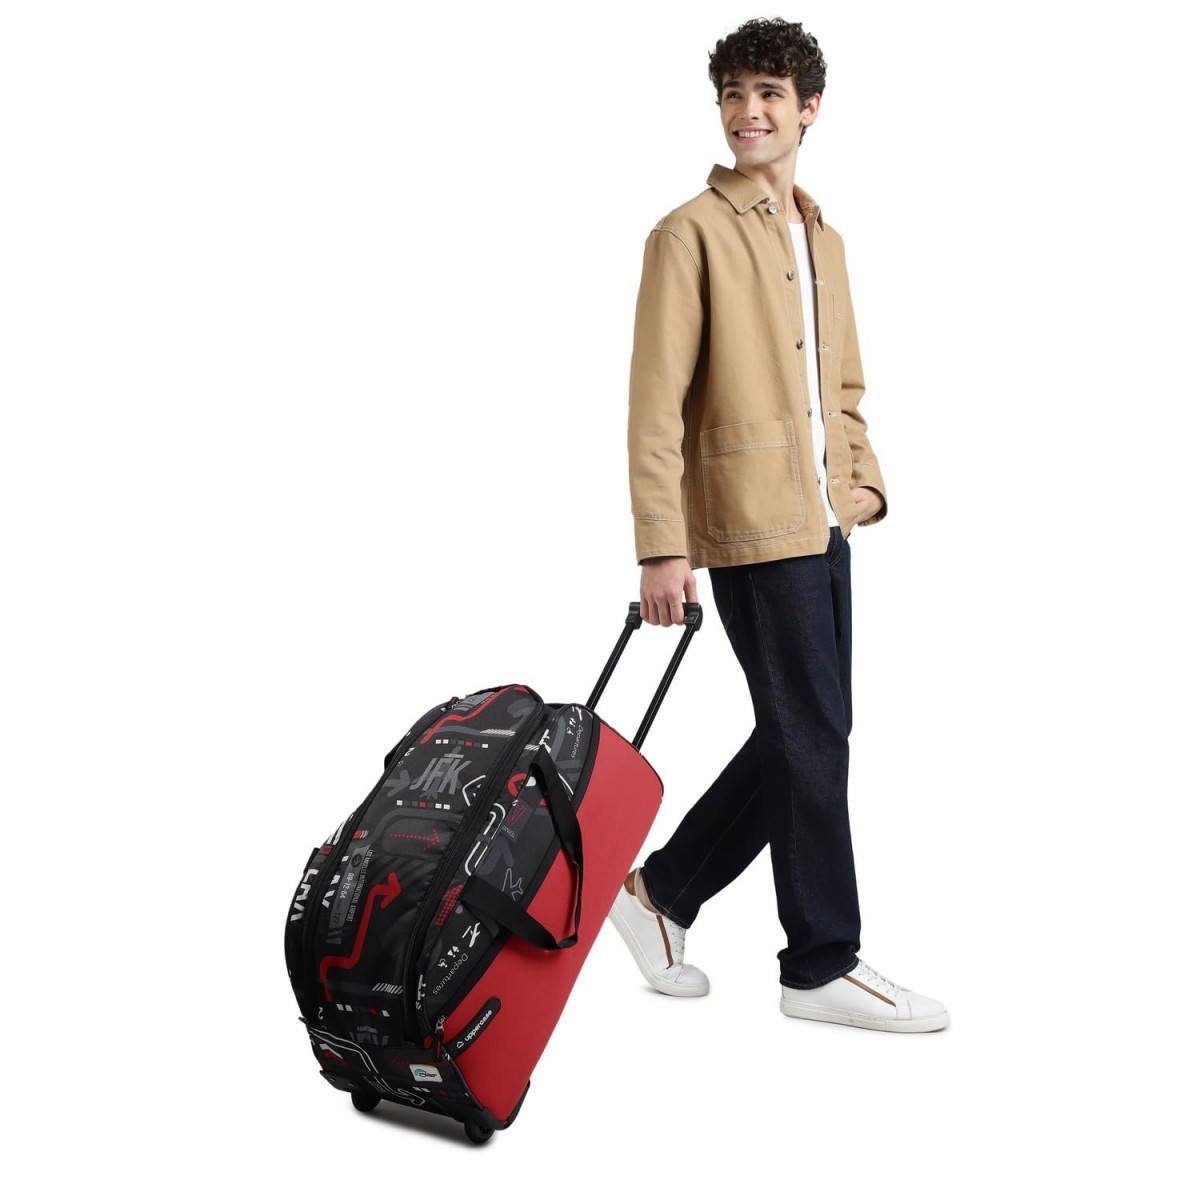 uppercase Polyester Jfk 62 Duffle Trolley Bag Dust Resistant Travel Bag Spacious Main Compartment Smooth Wheels Quick Front Pocket Access Duffle Bag For Women  Men 1500 Days Warranty Red